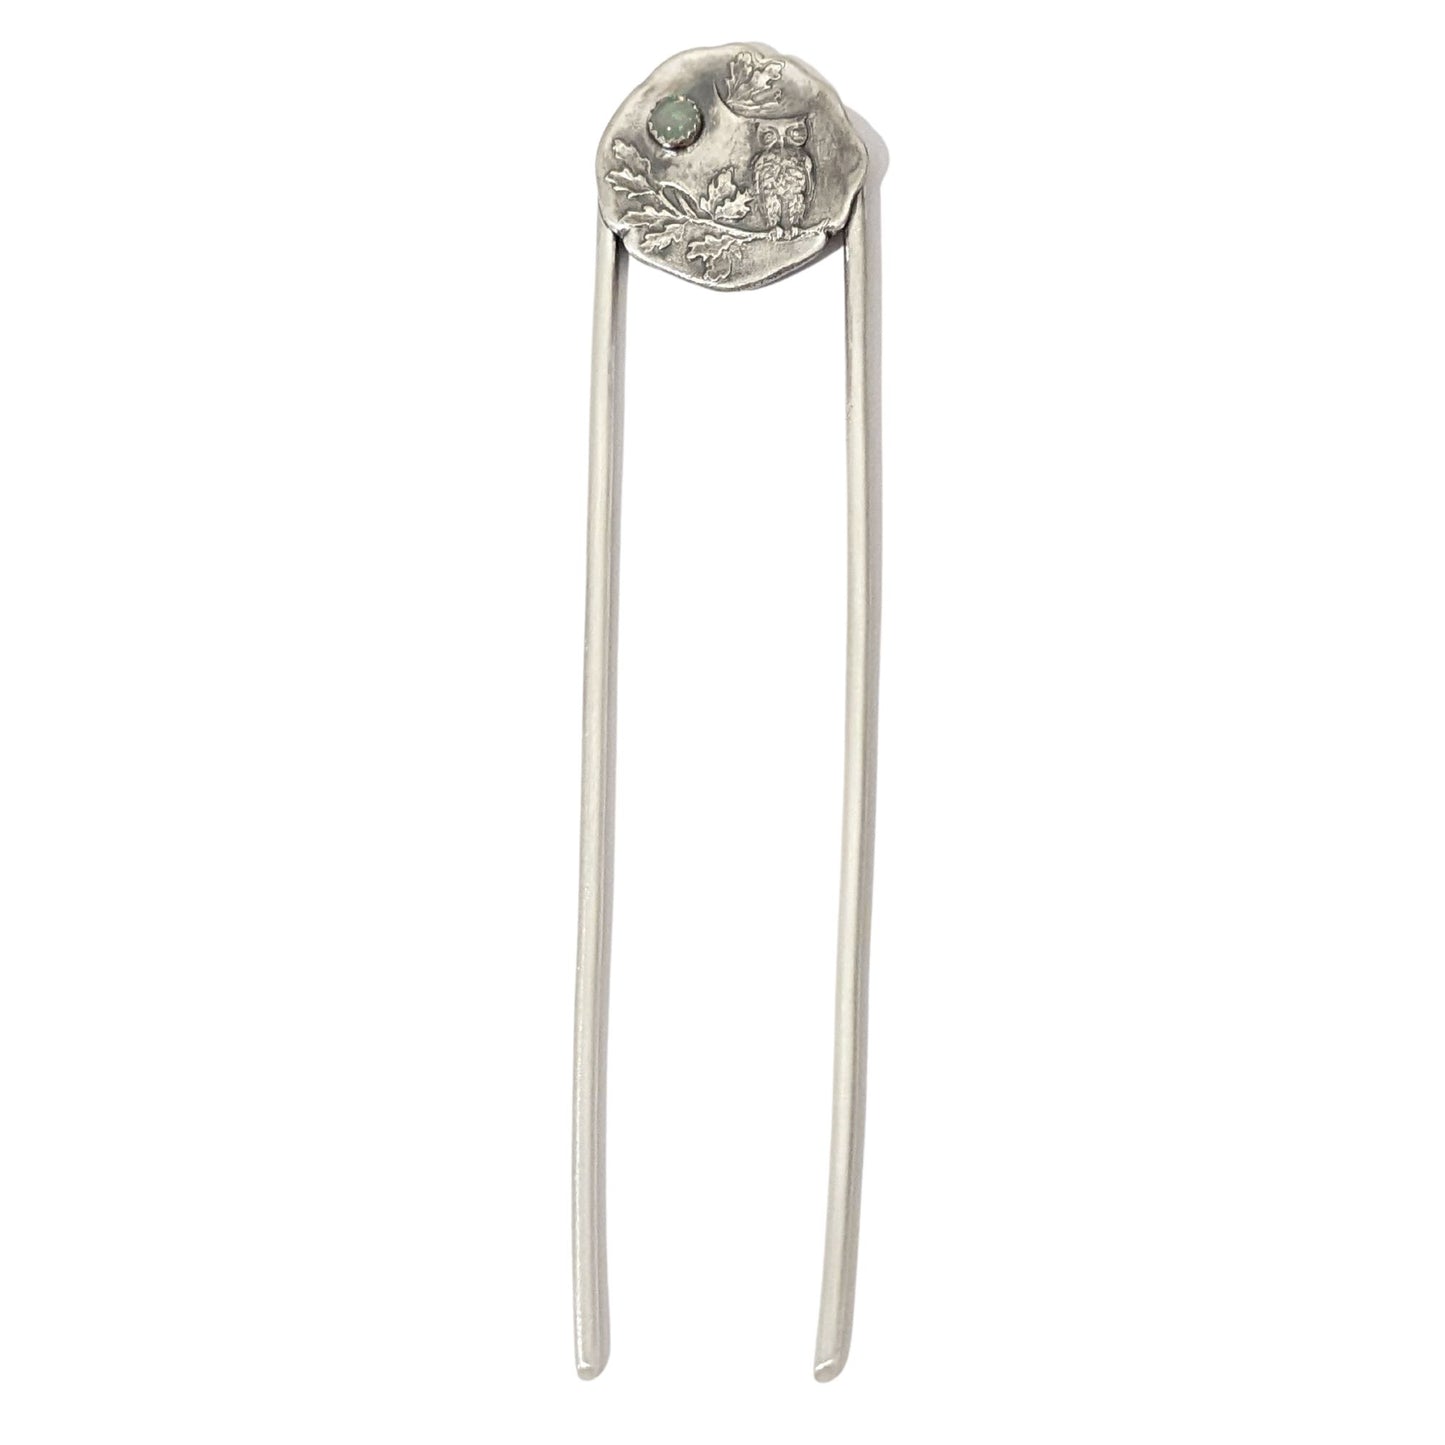 Sterling silver hair fork. The design at the top of the hair fork is a round sterling silver piece with a 3 dimensional design of an owl sitting on a tree branch. The branch has leaves, oak perhaps. Above the leaves there is a white opal gemstone to represent the moon.  This picture shows both the design at the top and the forks, which are straight and made of sterling silver.